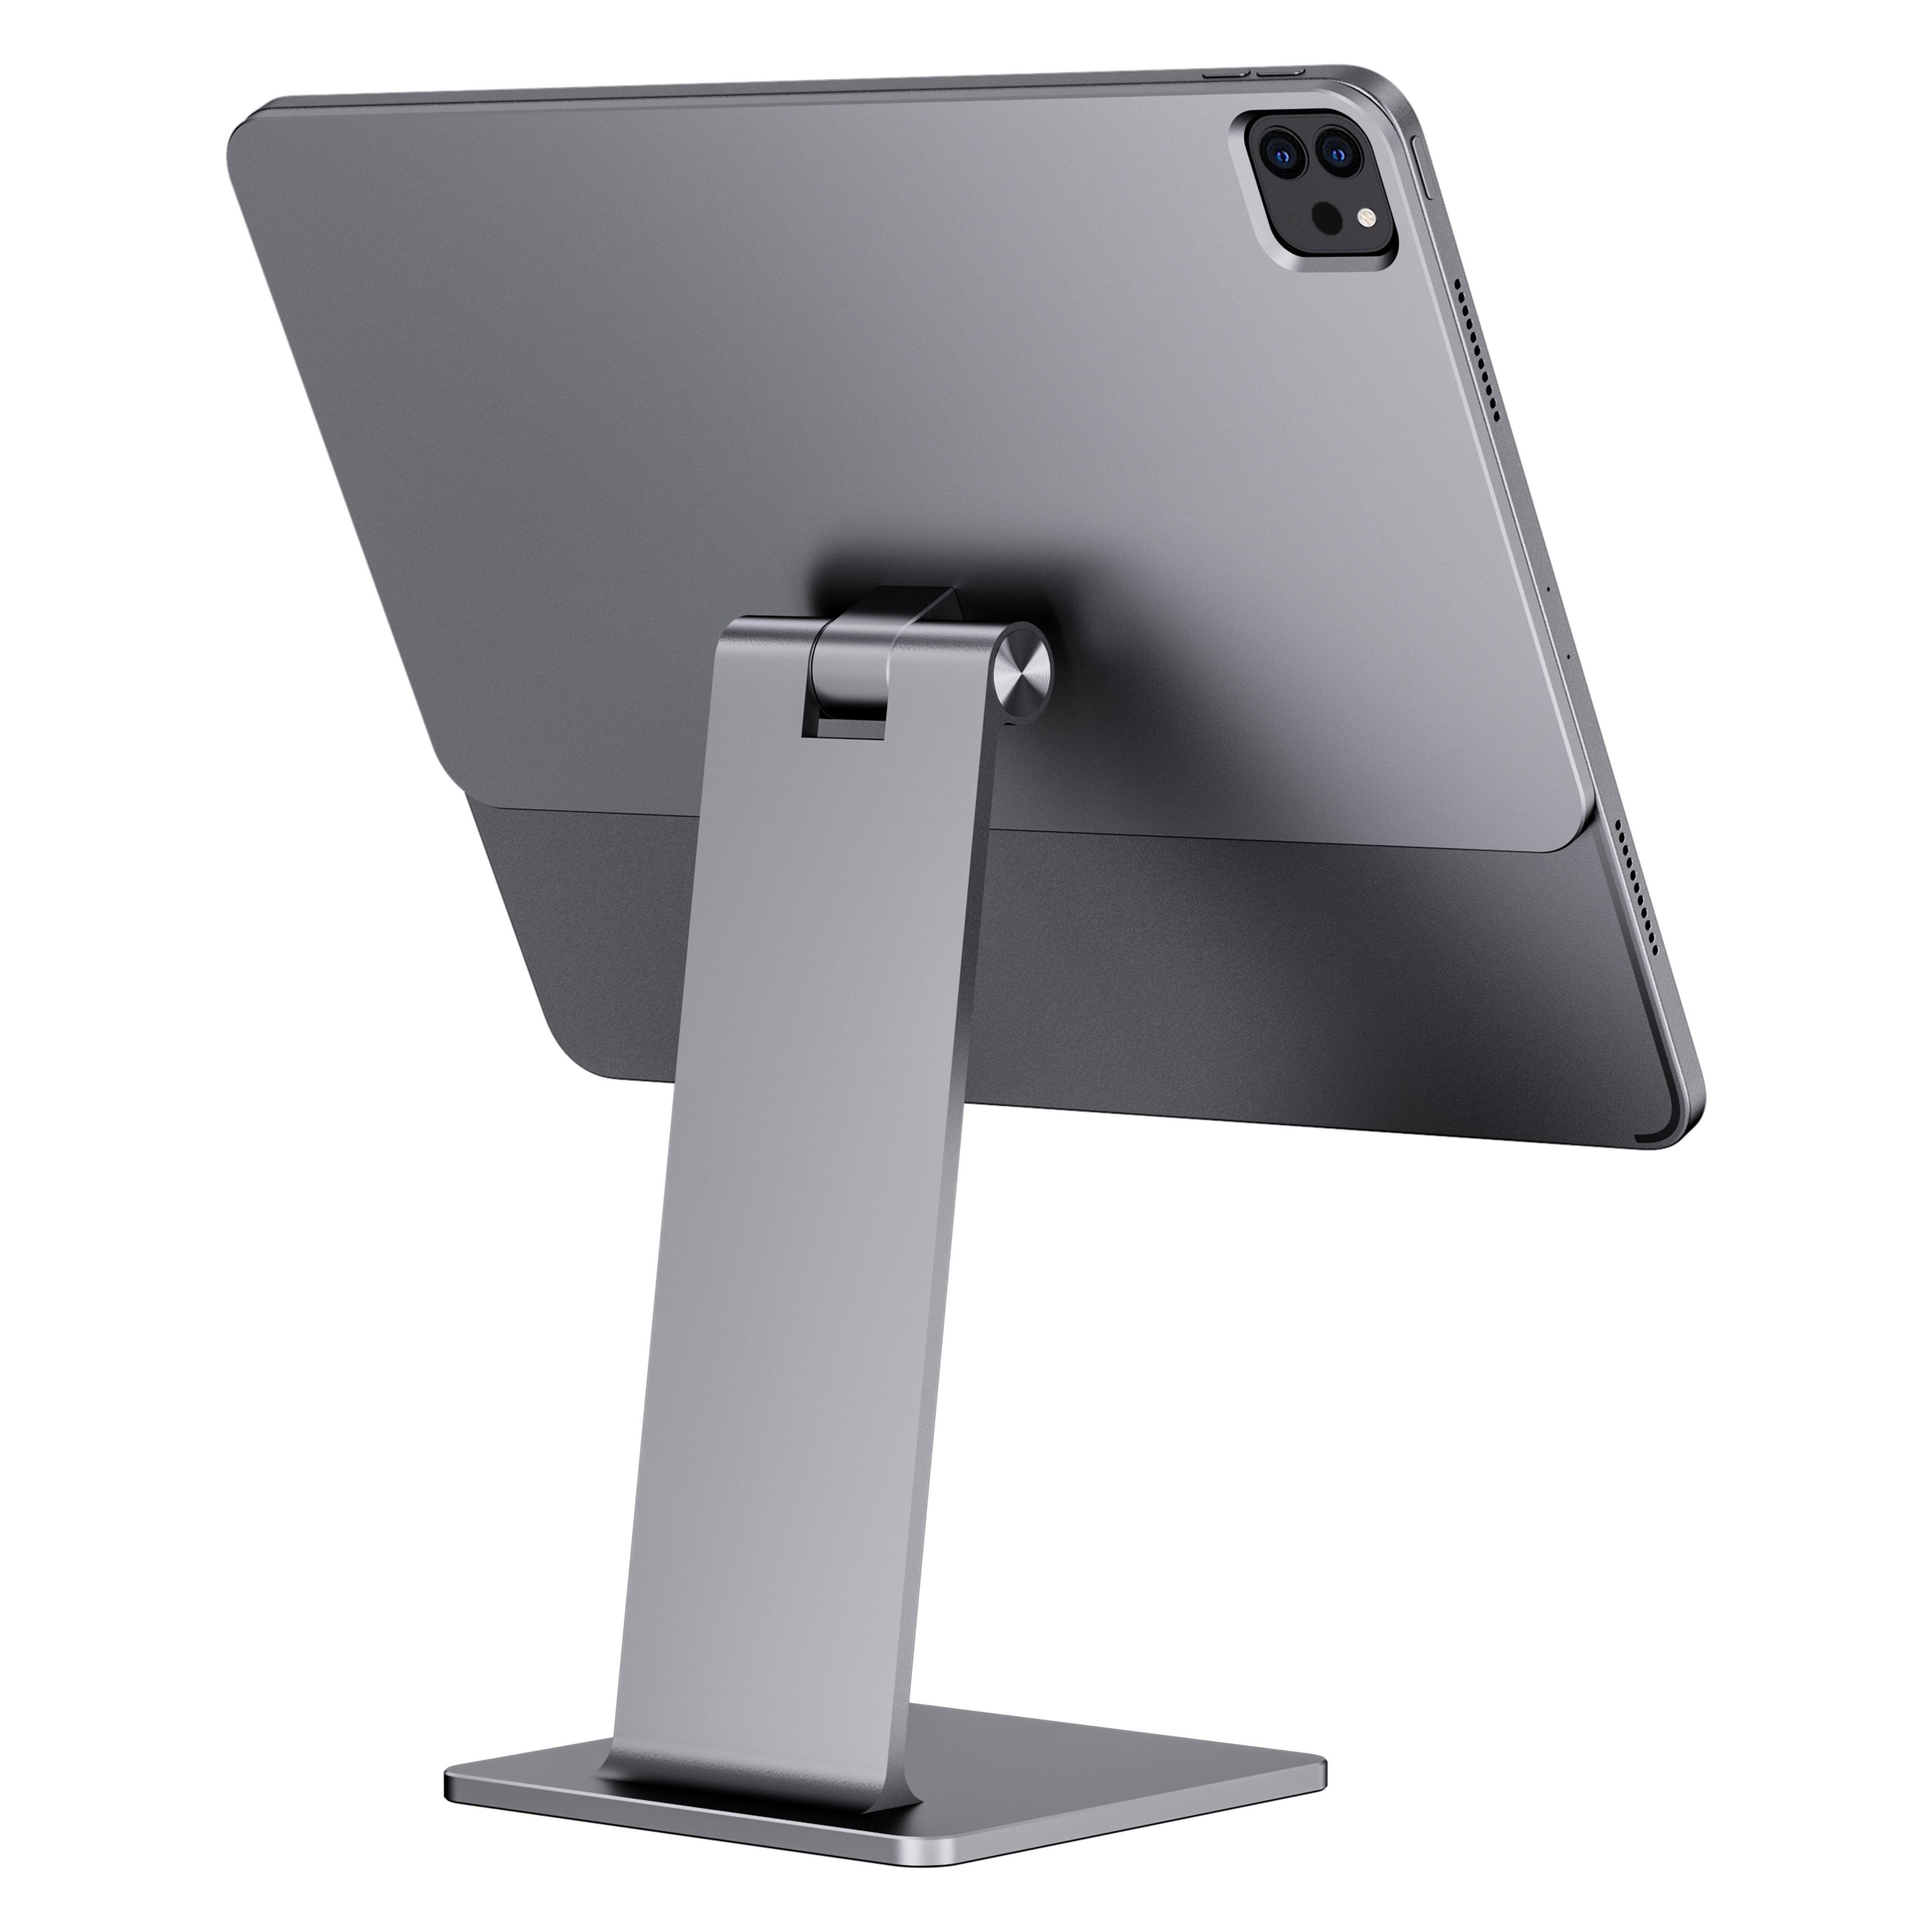 INVZI Tablet Computer Docks & Stands 11-inch (for iPad Pro 11-inch 4/3/2/1 and iPad Air 5/4) INVZI MagFree Pro Floating Magnetic iPad Stand  for iPad Pro iPad Air and iPad 10